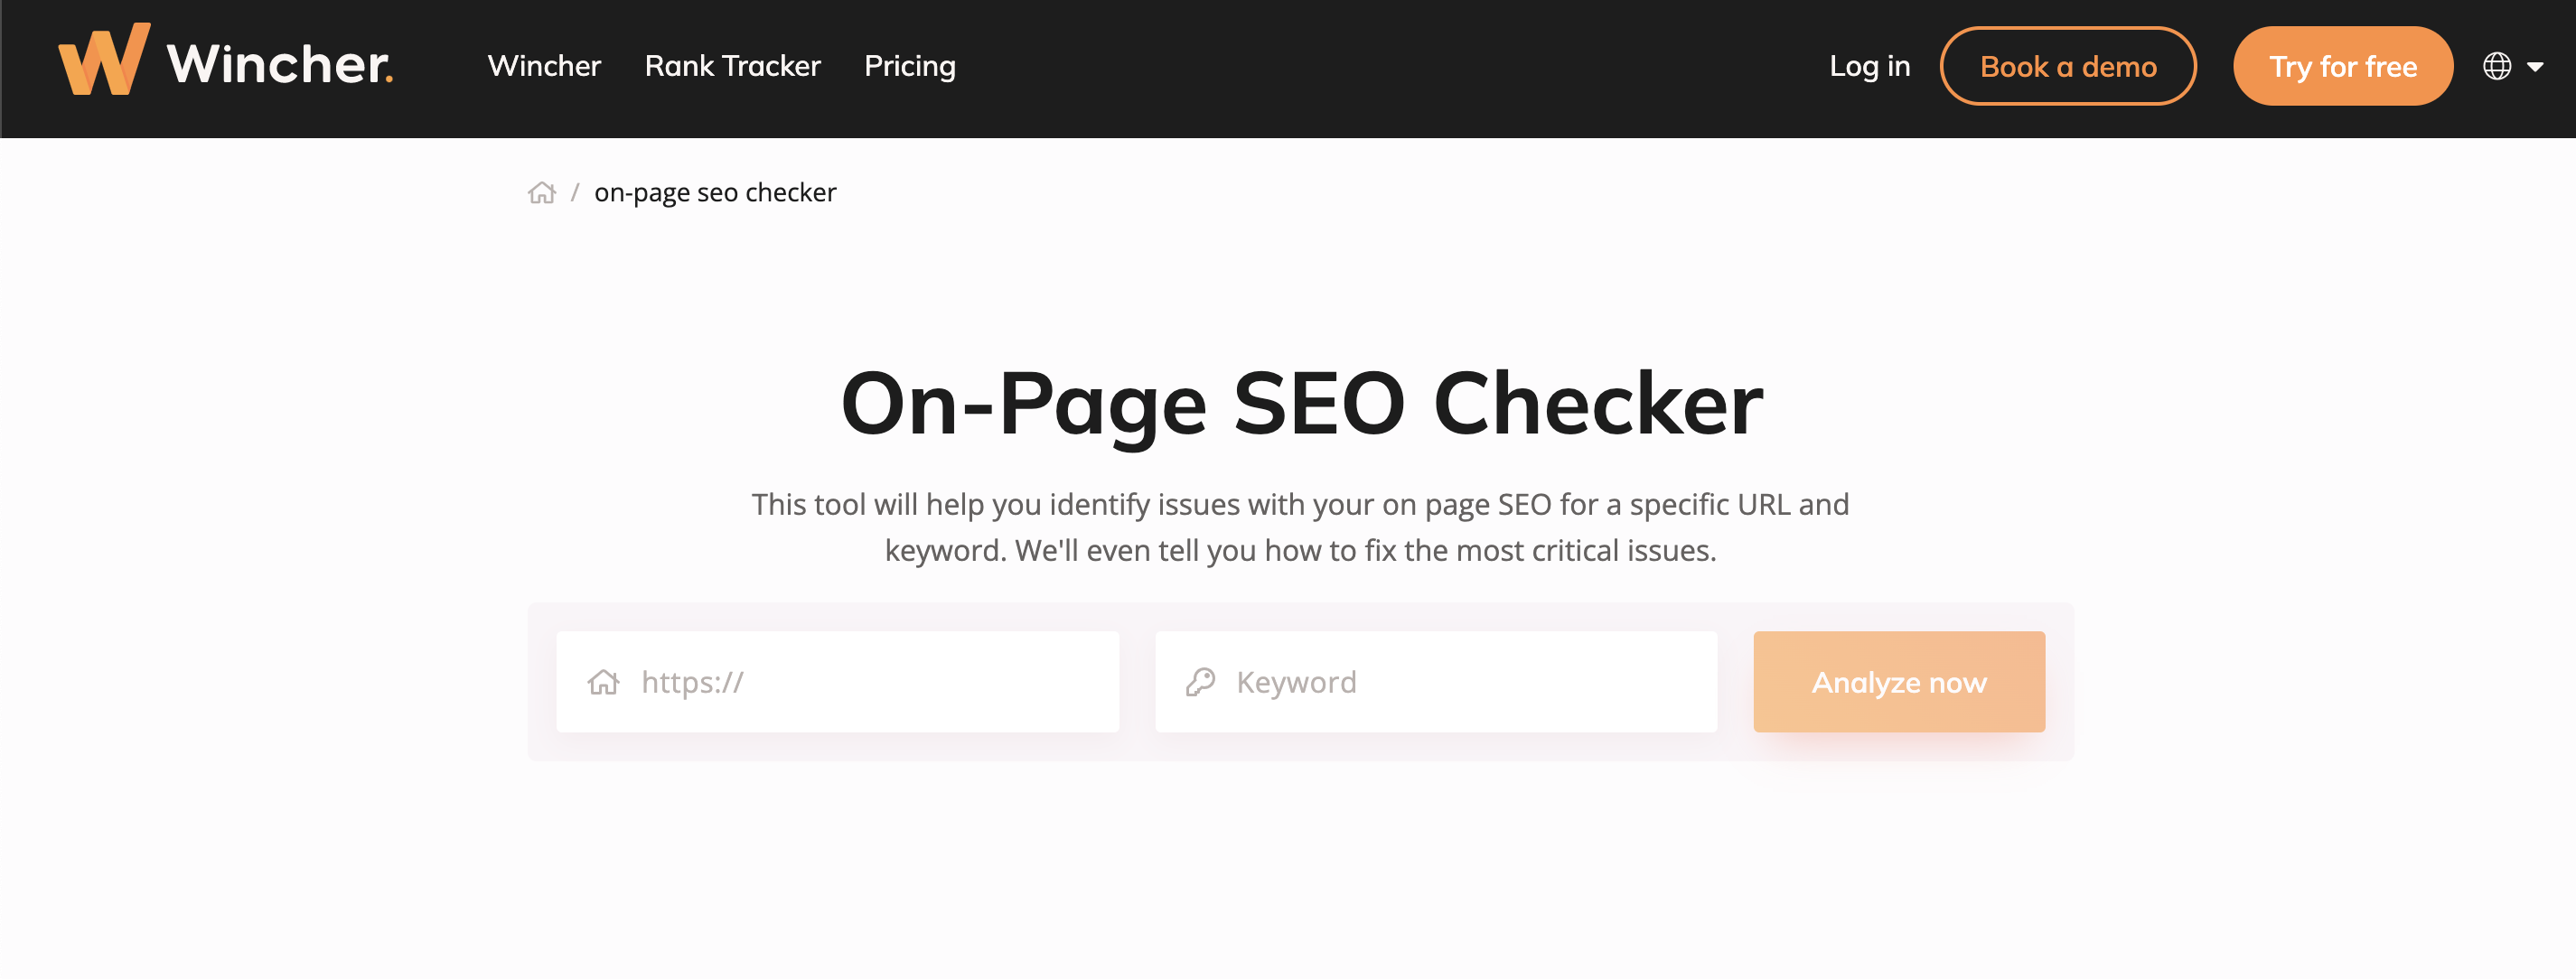 wincher on page seo checker top 10